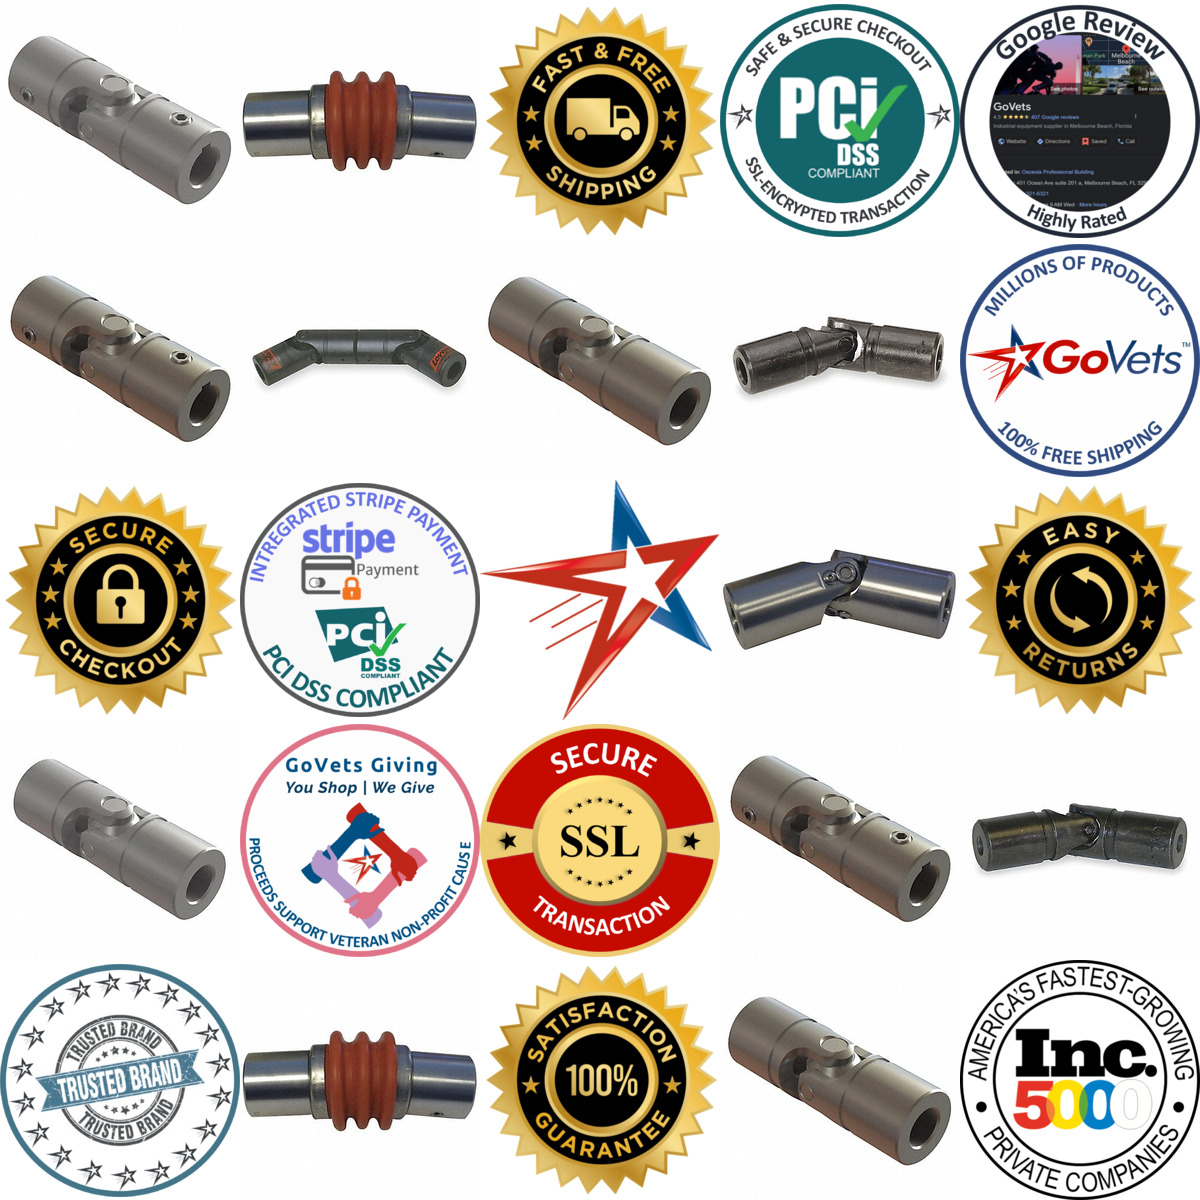 A selection of Universal Joints products on GoVets